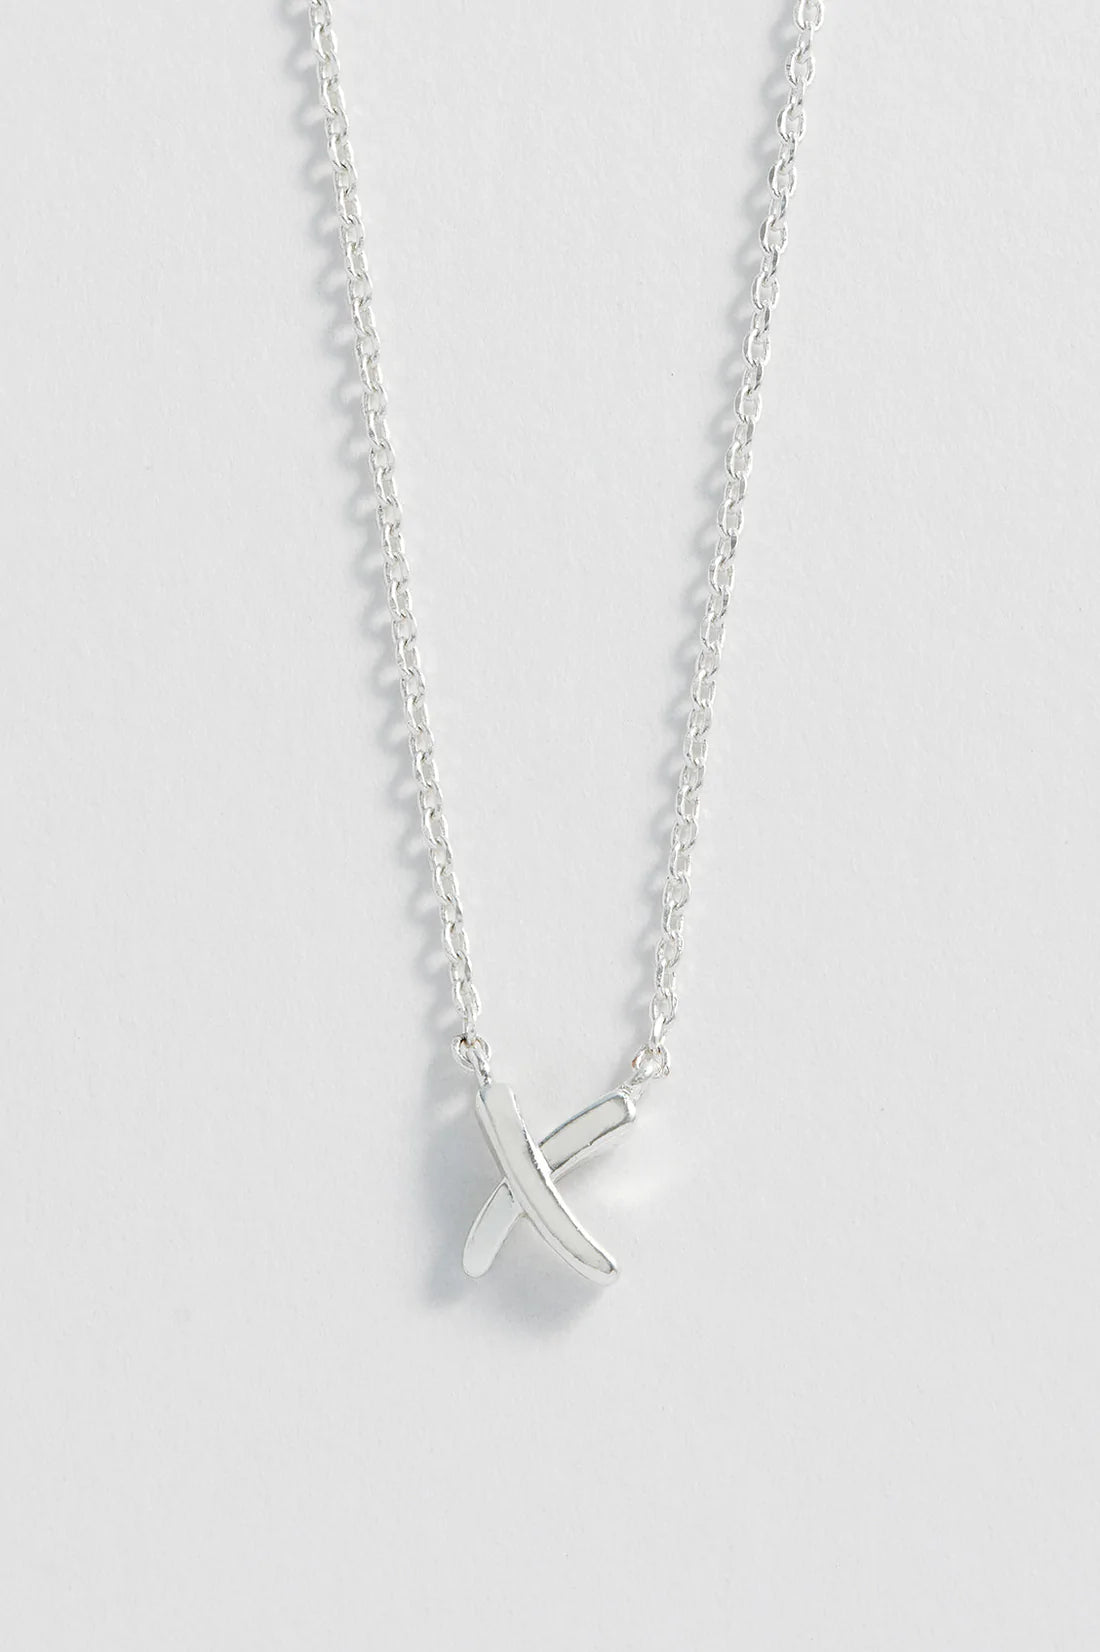 Silver Plated Kiss Necklace by Estella Bartlett